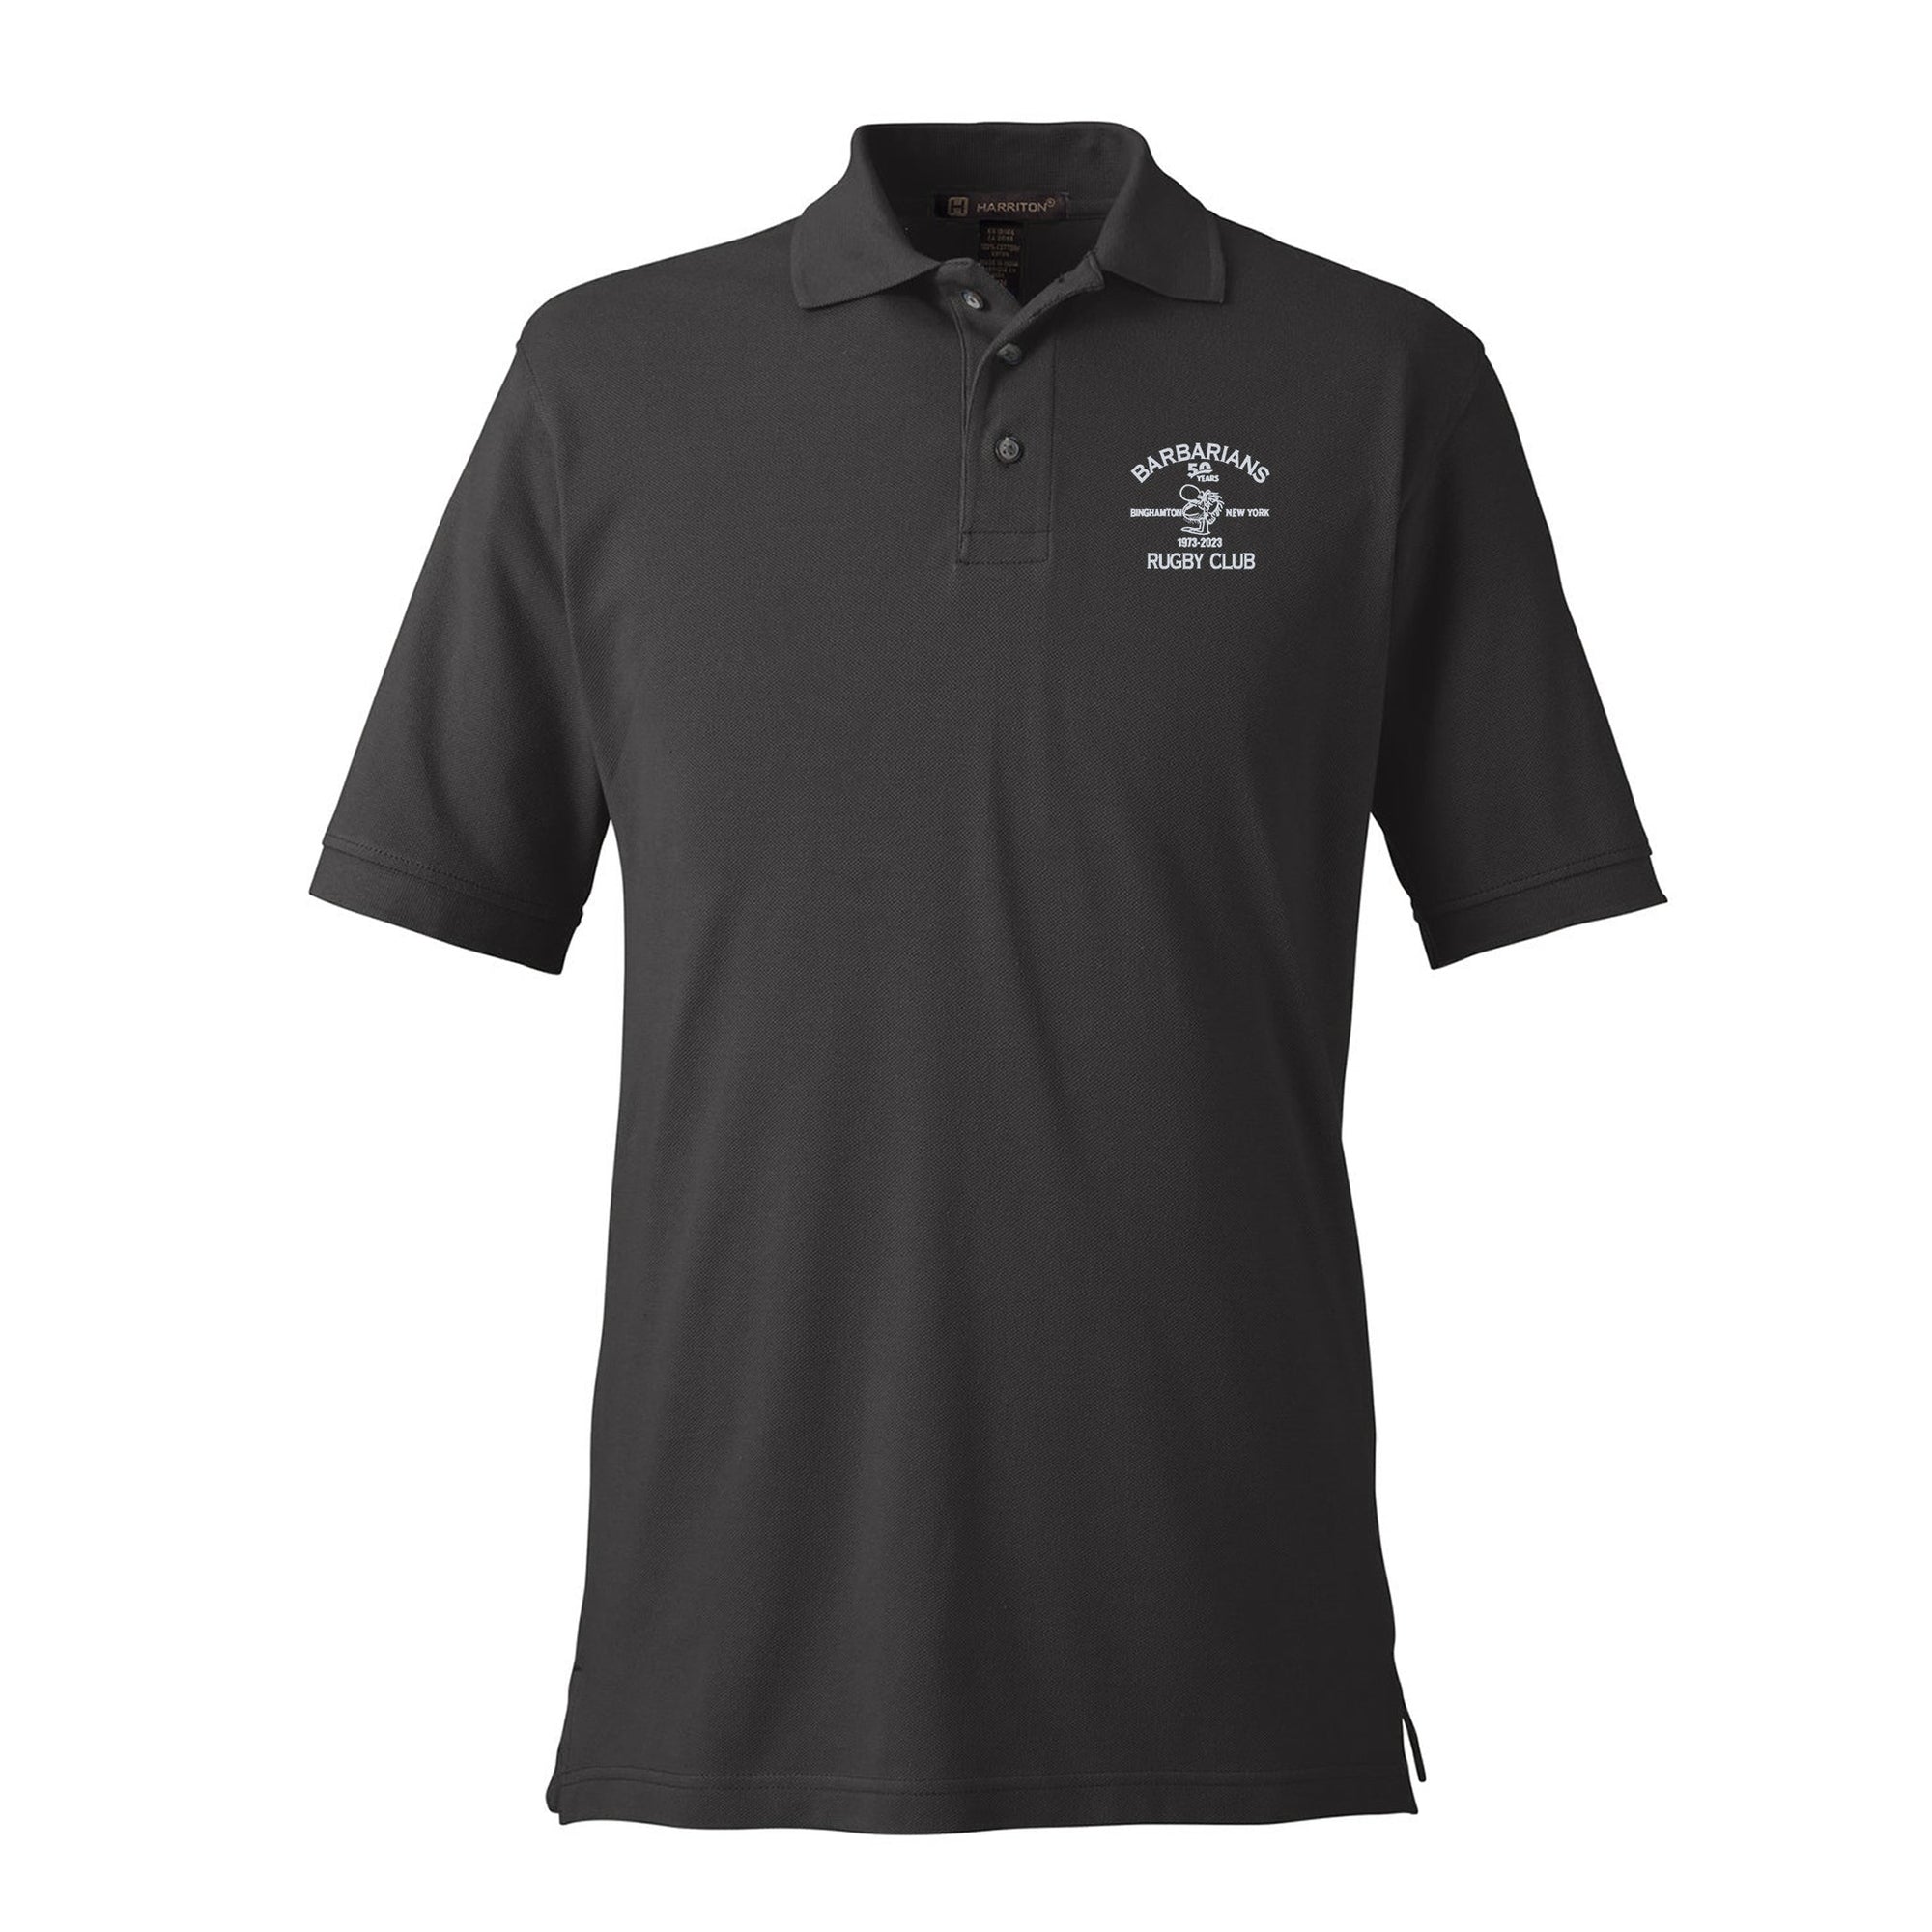 Rugby Imports Binghamton Barbarians Cotton Polo